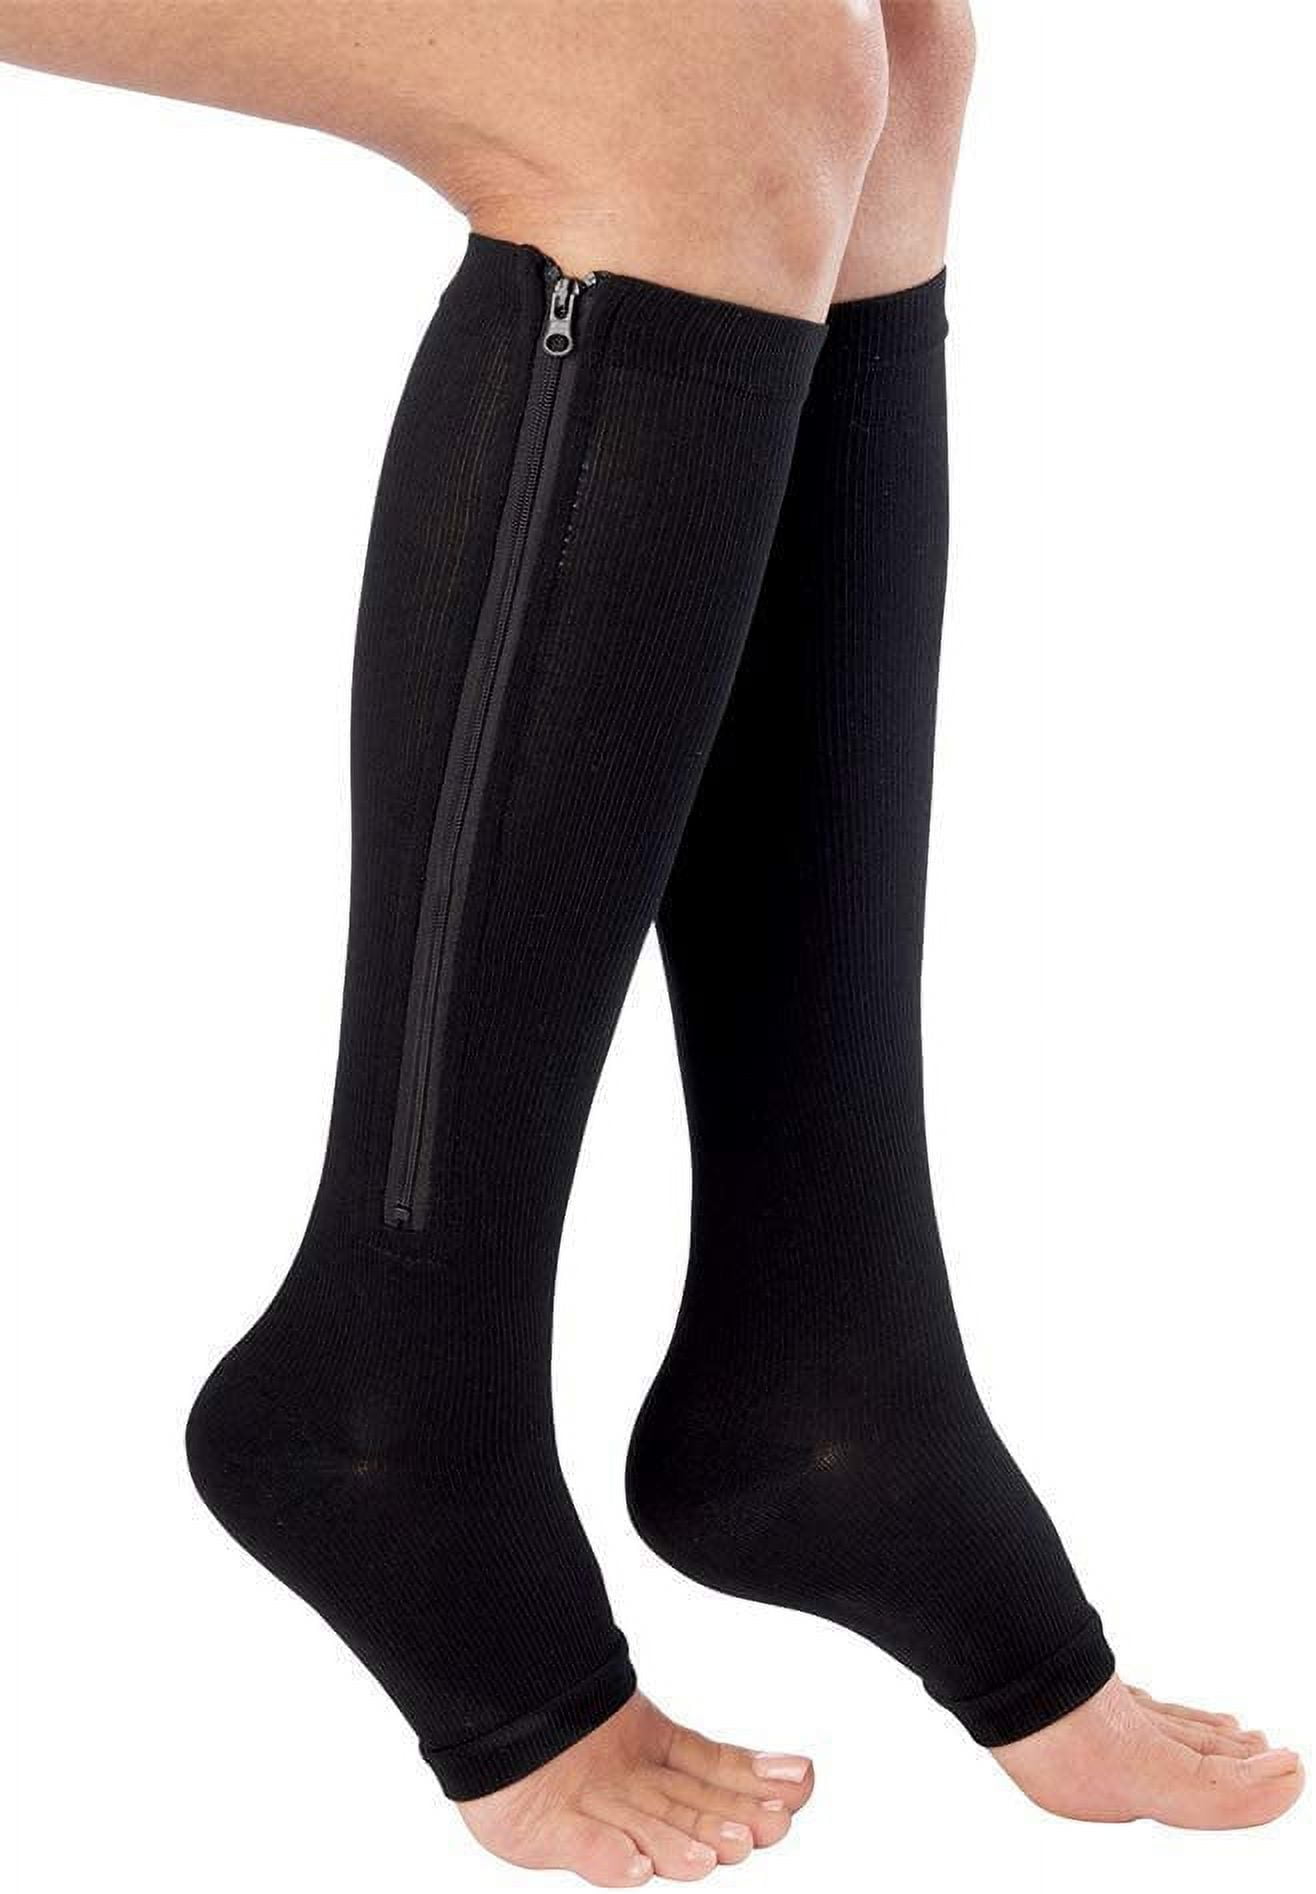 ZIP SOX - ZIP UP COMPRESSION SOCKS LEG SUPPORT~ Size S/M ~ BEIGE~ OPEN  TOES~NEW